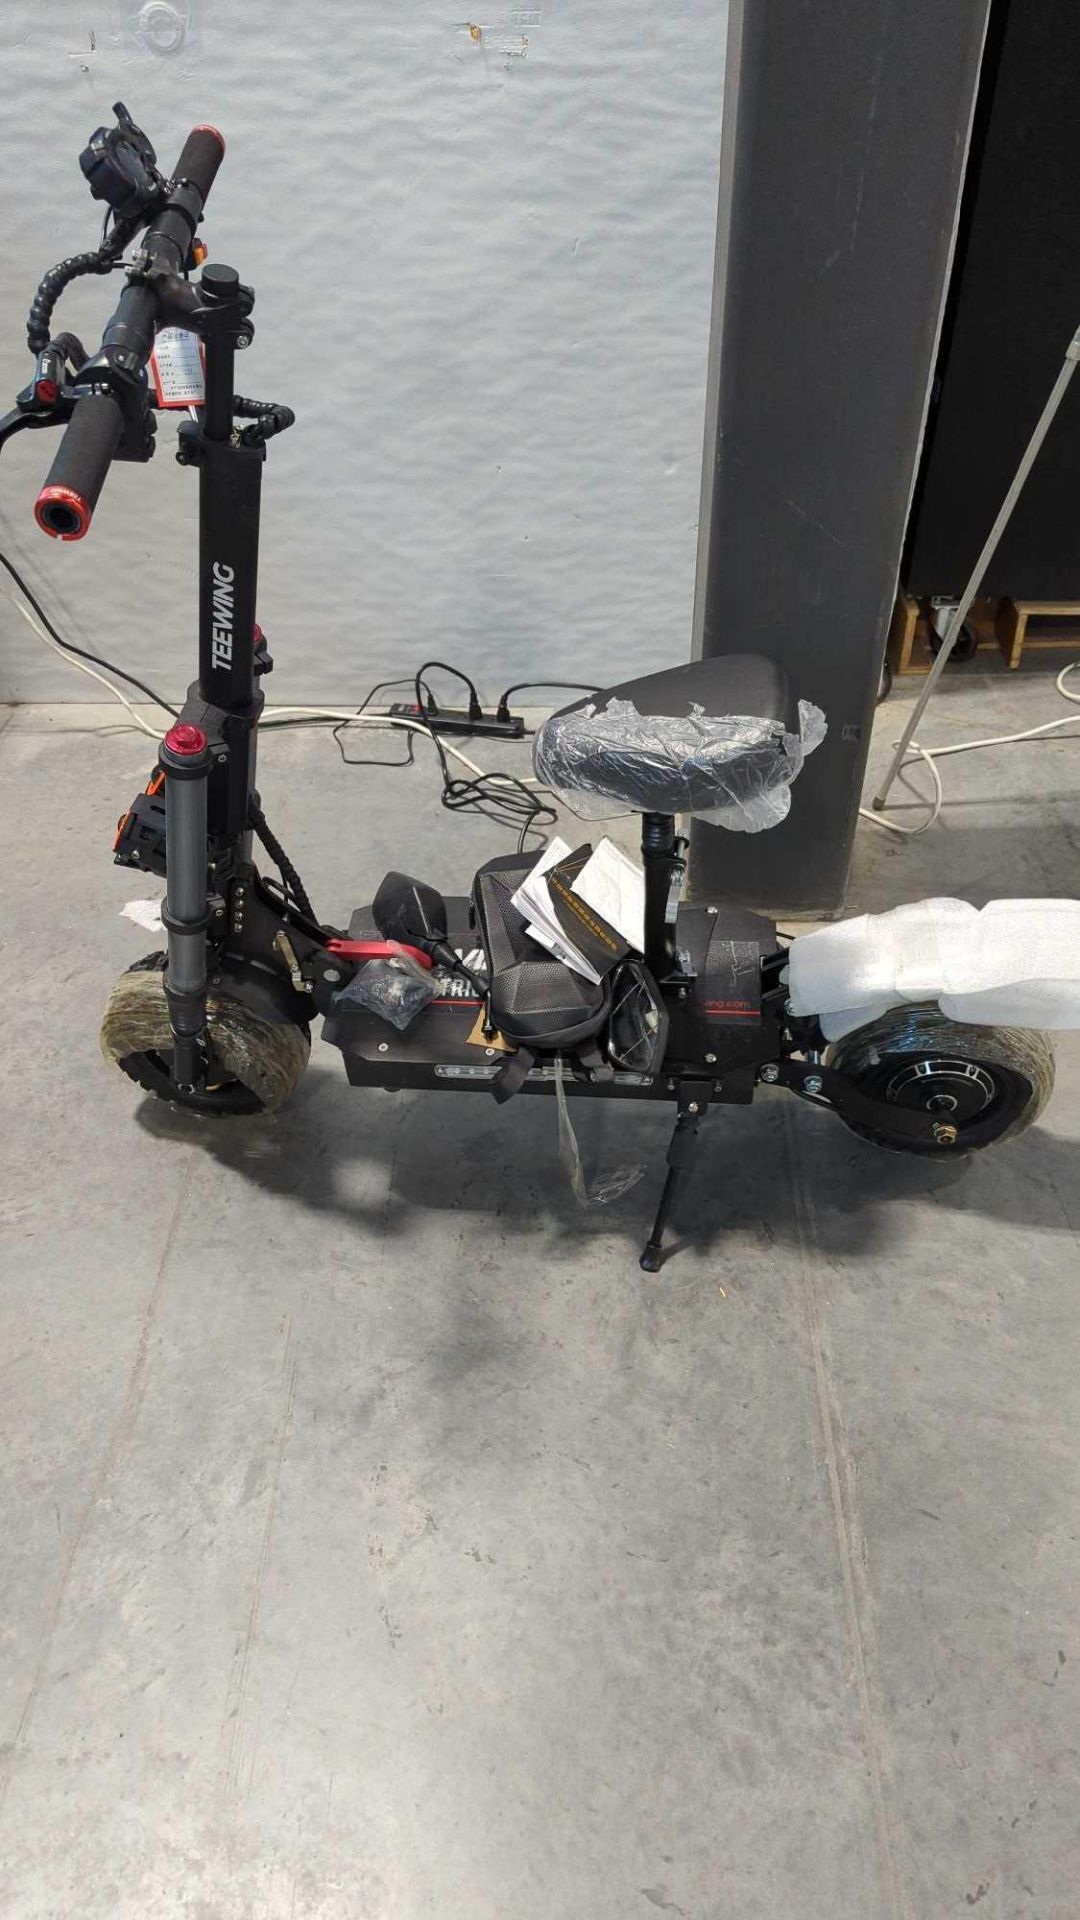 teewing x4 electric scooter (appears complete, condition unknown)